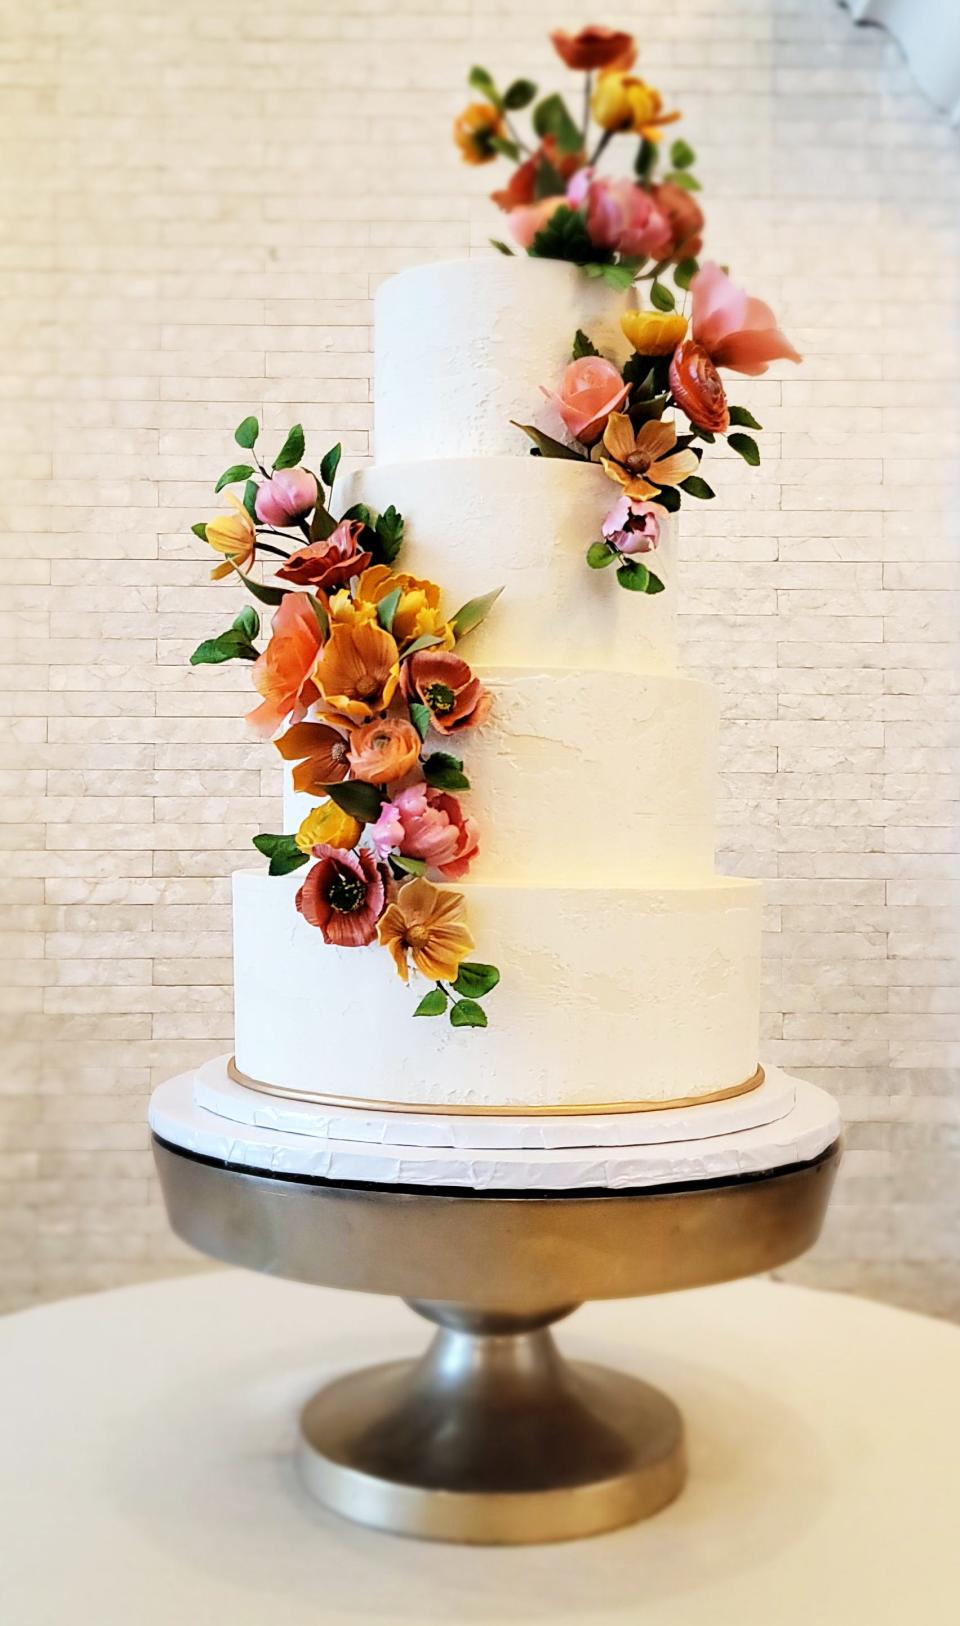 A recent wedding cake creation from Confectionary Designs in Rehoboth. All the flowers on their cakes are hand crafted with sugar.